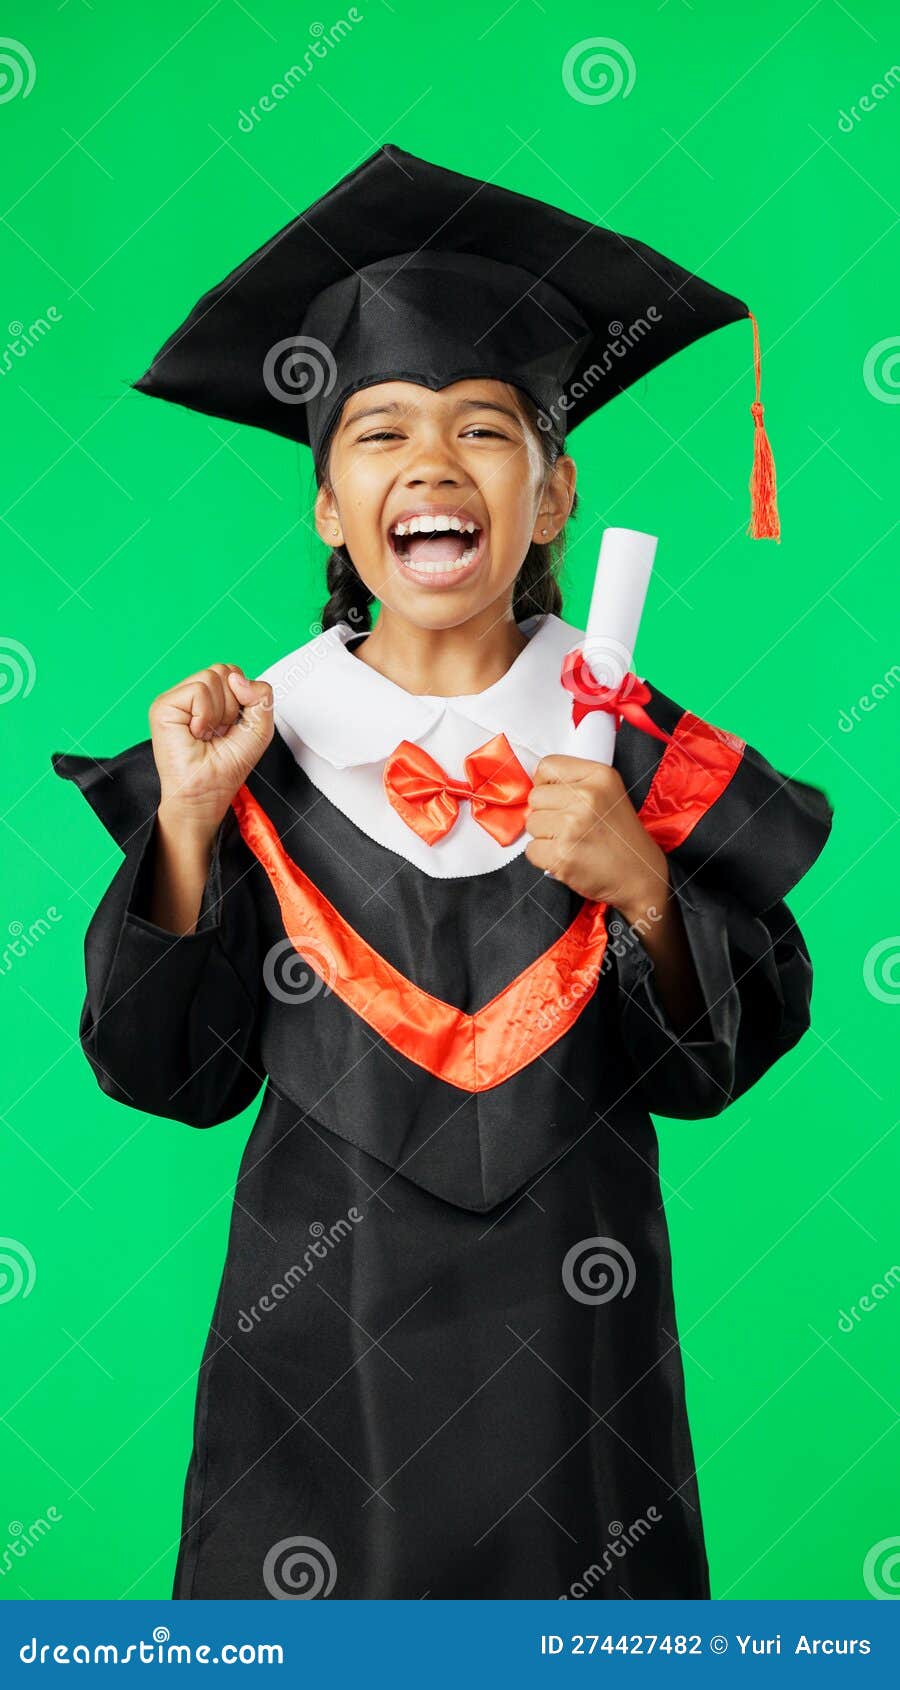 Souvenir (One-time Use) Graduation Gown from Grad Goods & More. Horizon  Graduation Cap & Gown for high school, middle school graduations. Made in  USA. Fast order fulfillment.